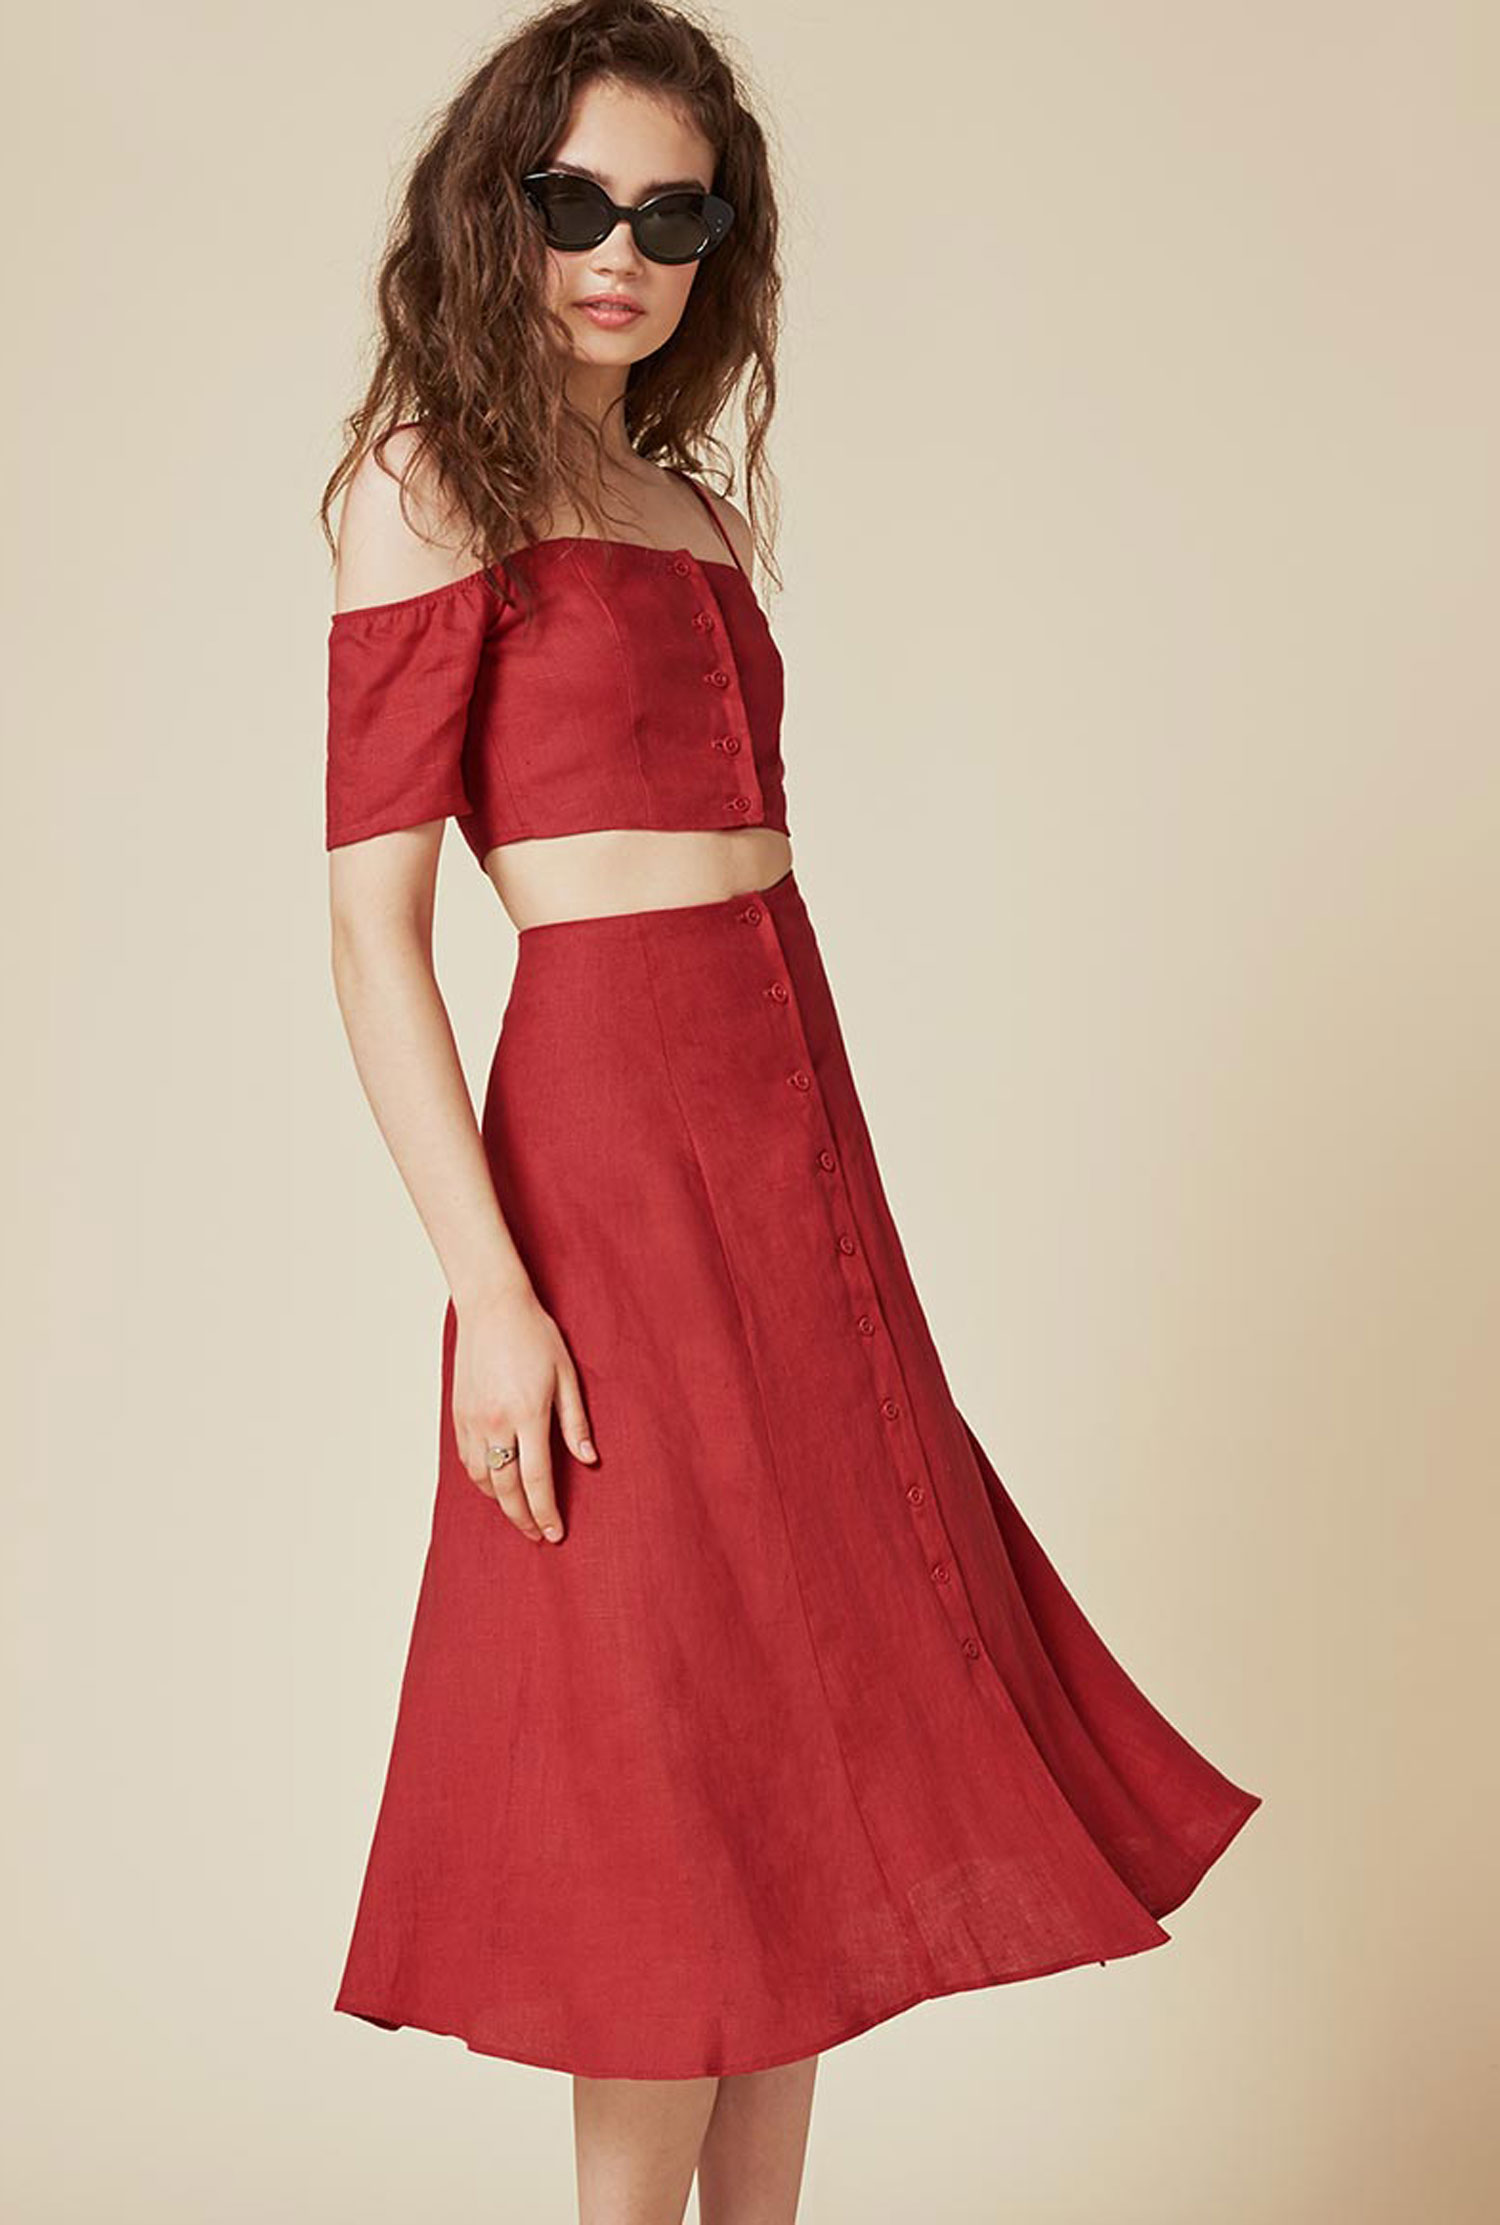 The-Reformation-Kleid-rot-AVA_TWO_PIECE_BLOODY_MARY_3